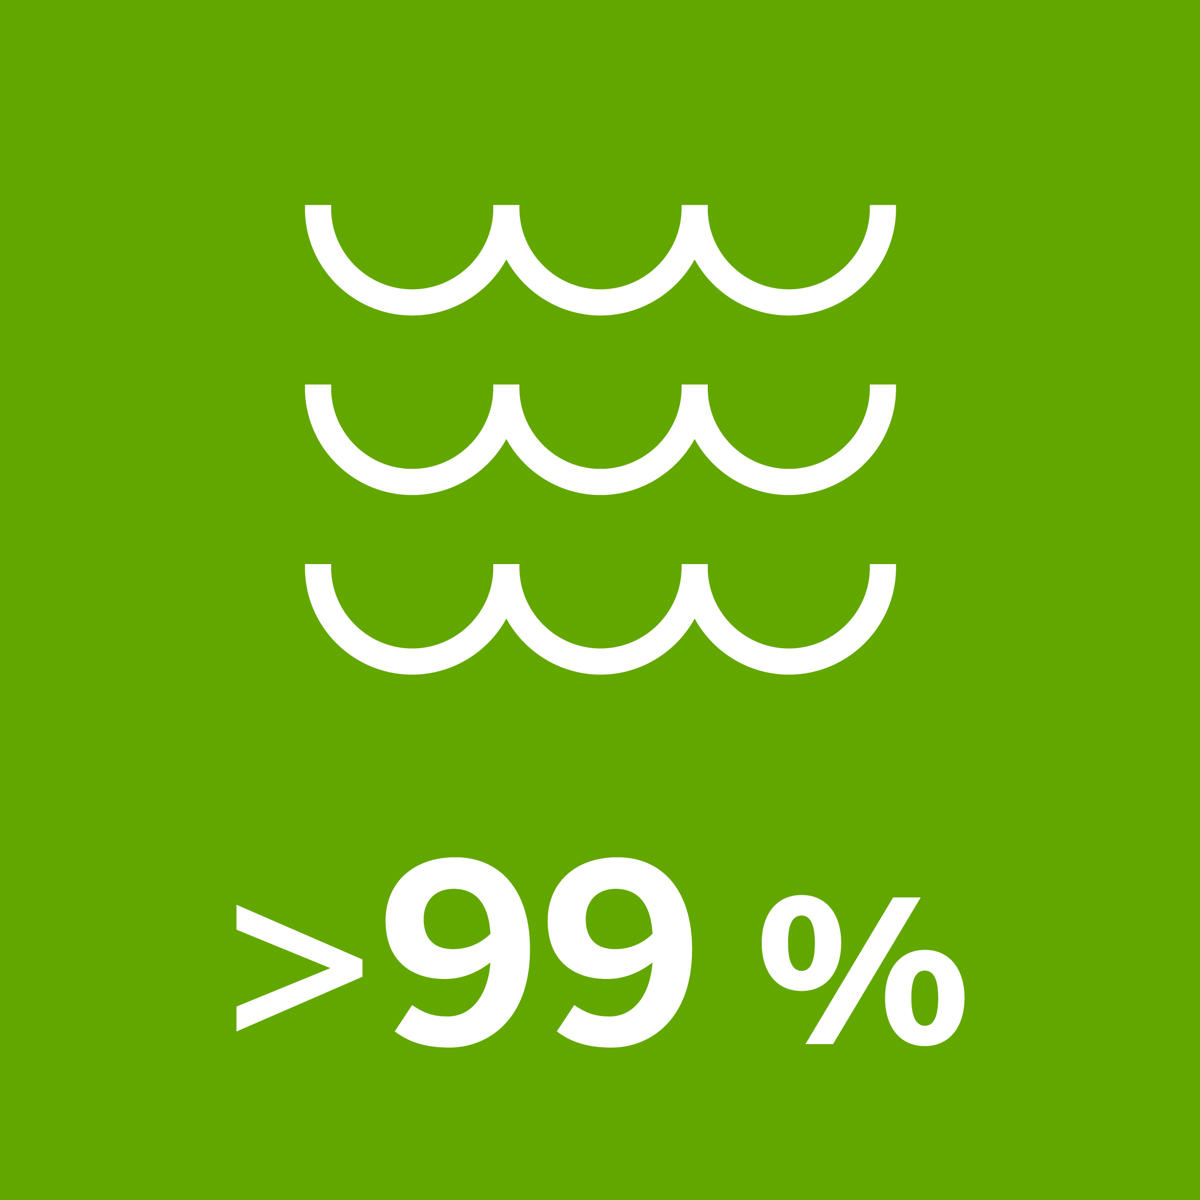 >99 % of the water we use is surface water from lakes and rivers.